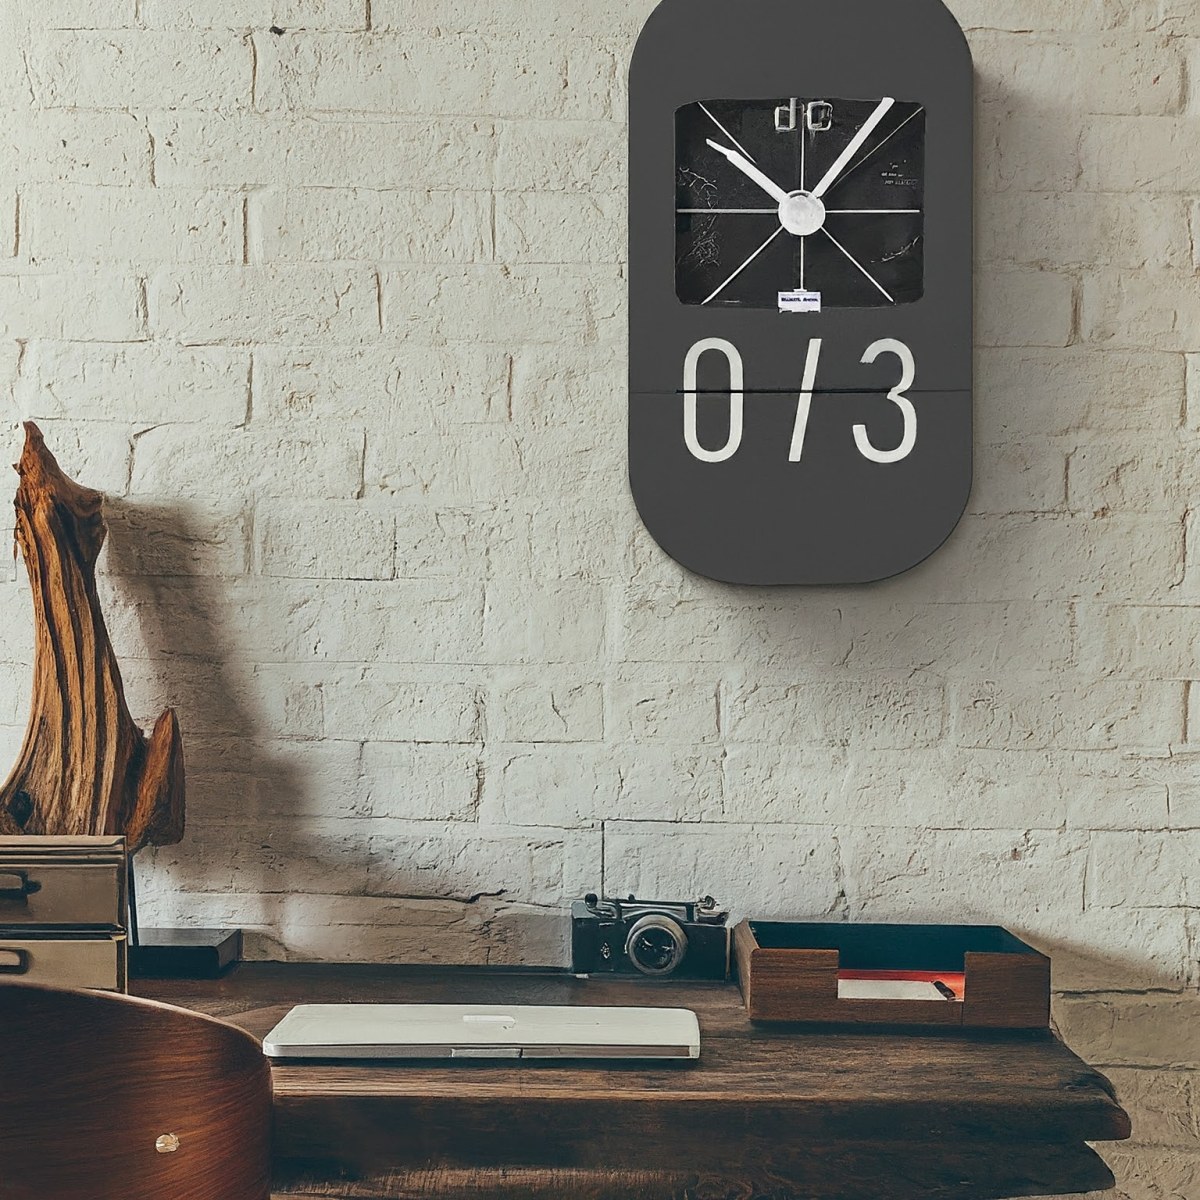 Silence is Golden! 5 Quiet Analog Clocks That Won’t Tick You Off at Night